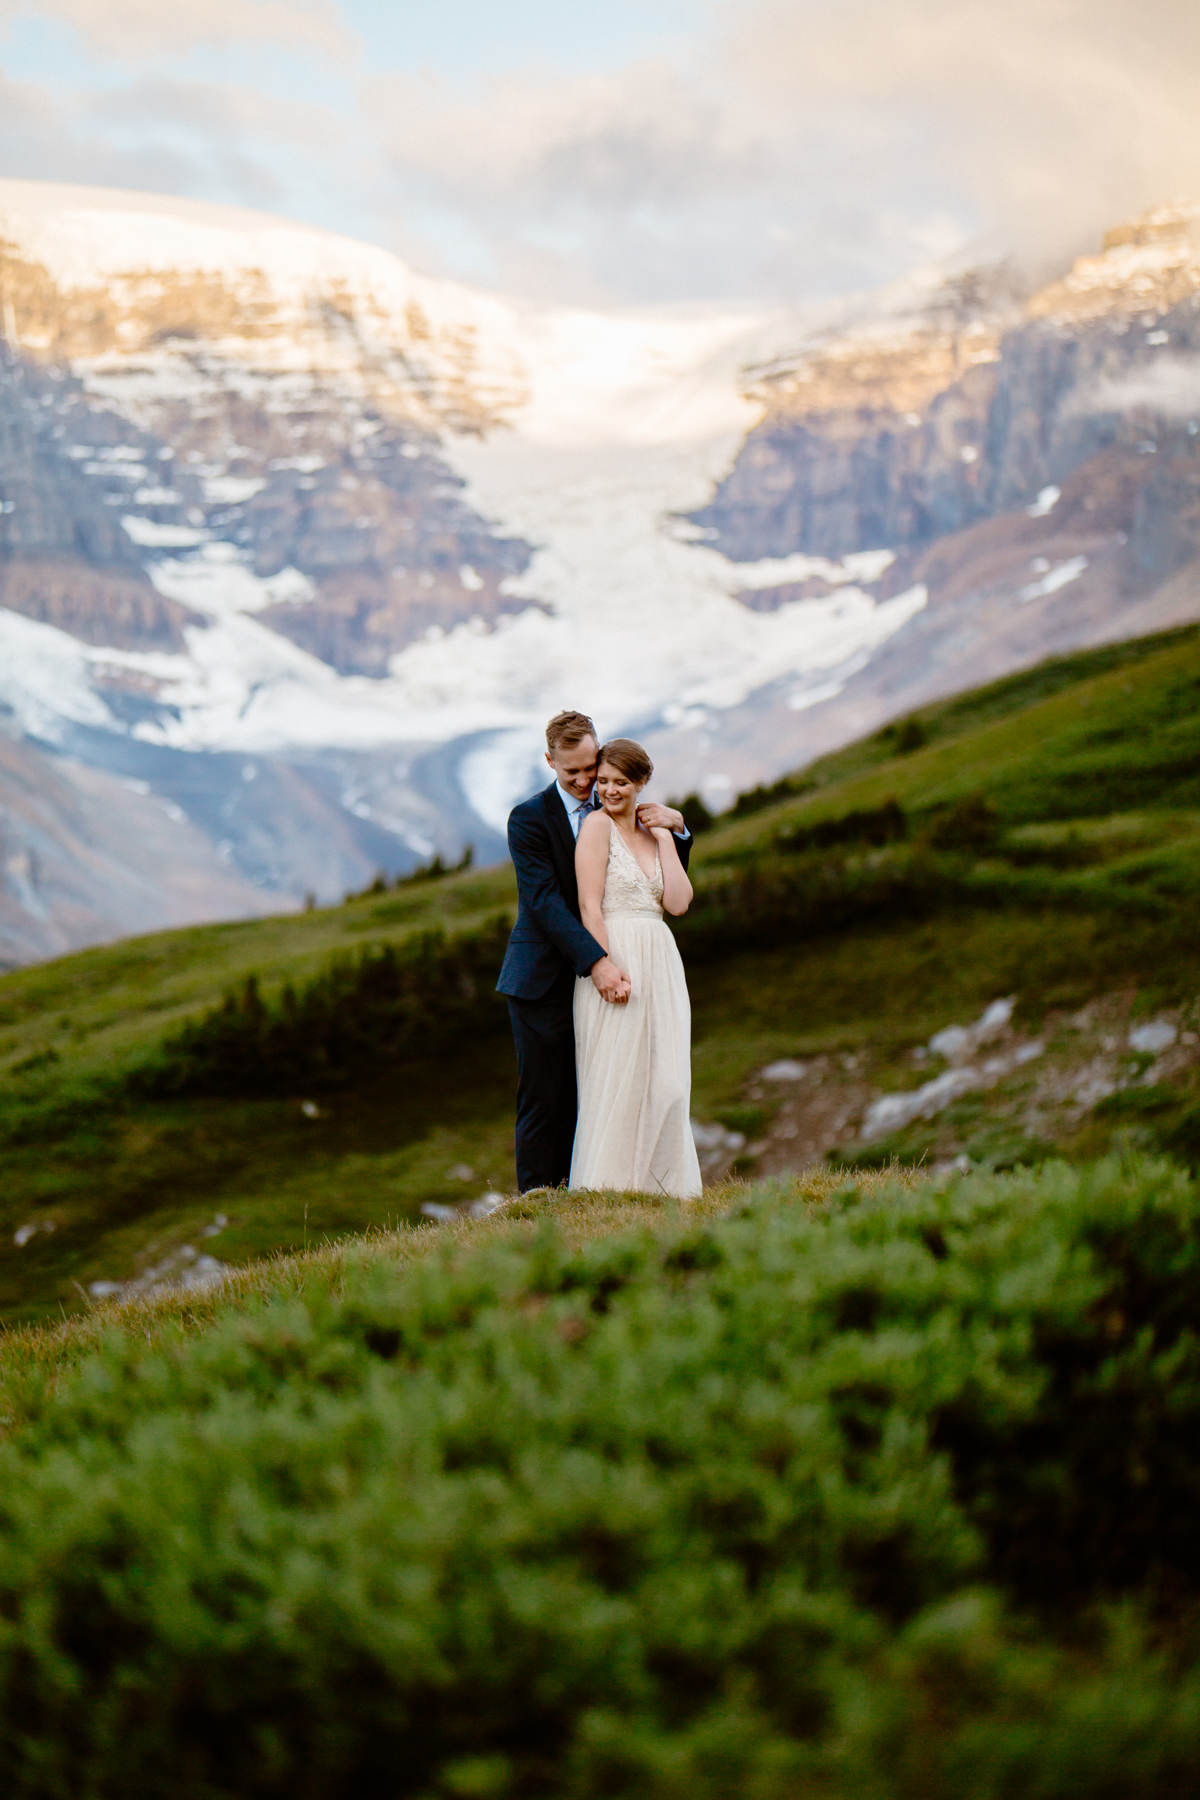 Hiking Elopement Photographers in Banff National Park - Photo 26